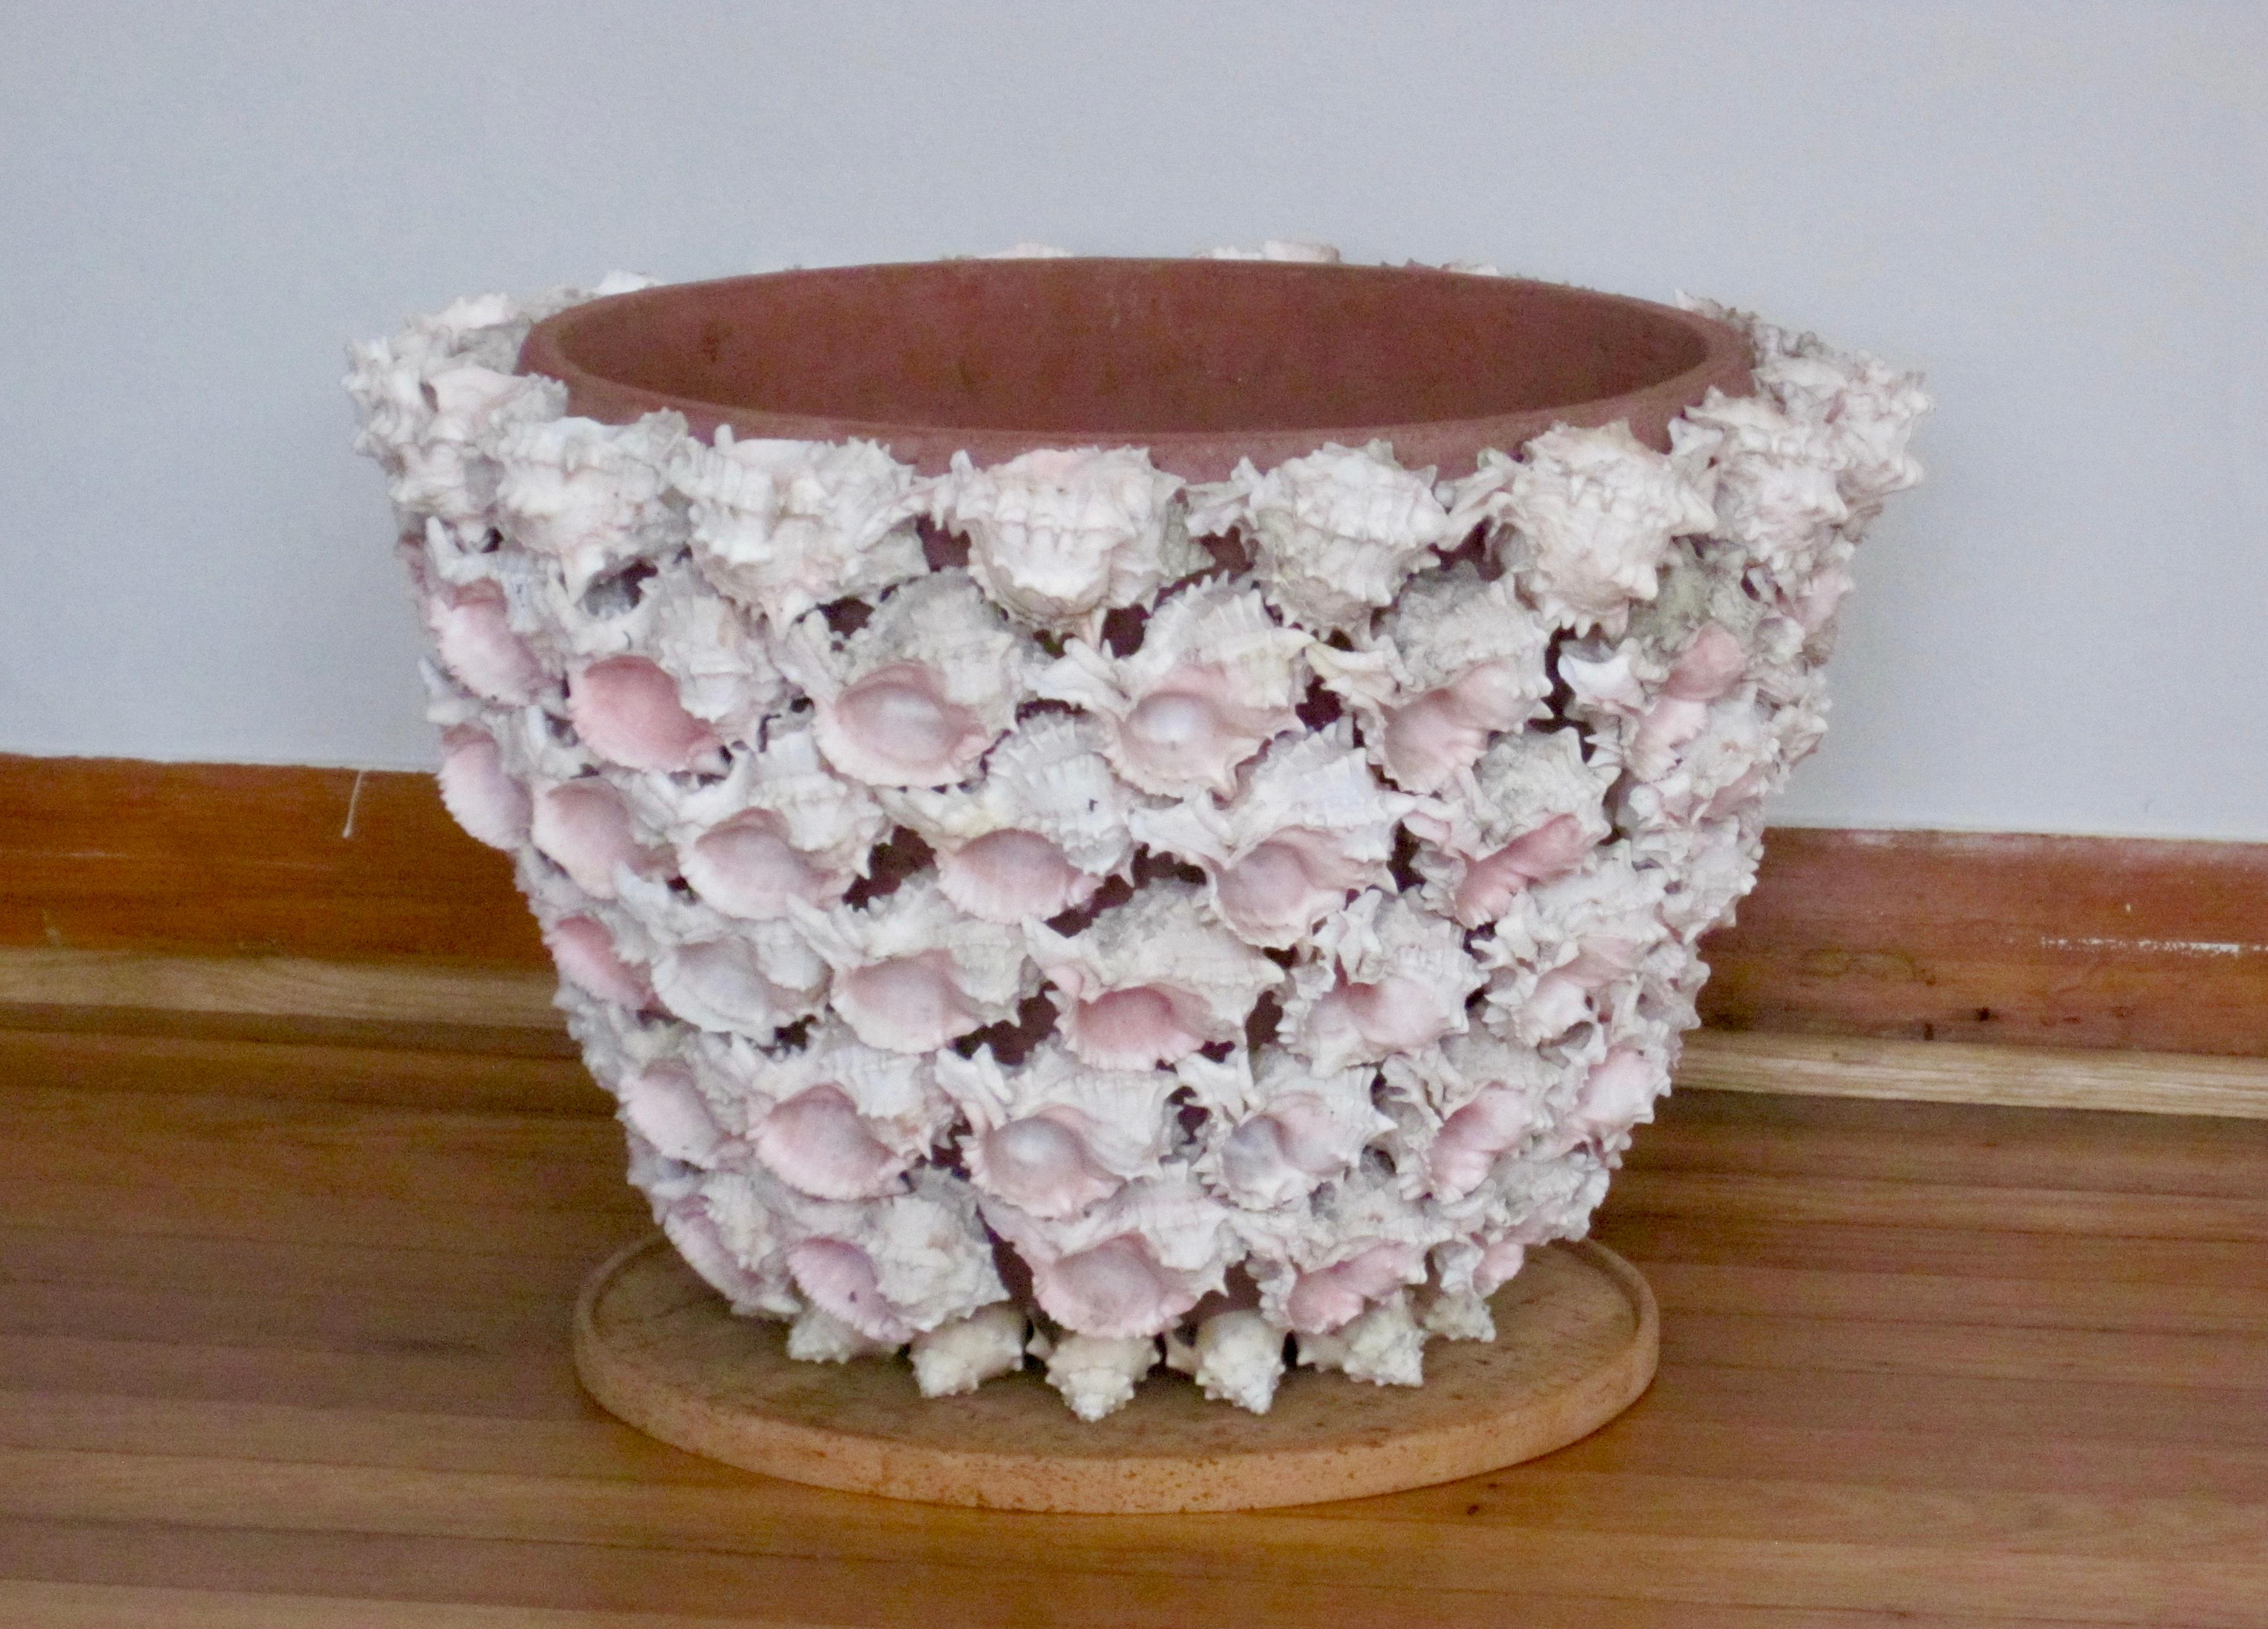 A hand-crafted, folk art conch shell encrusted terra cotta pot from the mid 20th century. Each individual shell has been adhered to a 1/4 inch terra cotta planter pot with care. Interior of pot is hand scraped.
Great coastal vibe and solid